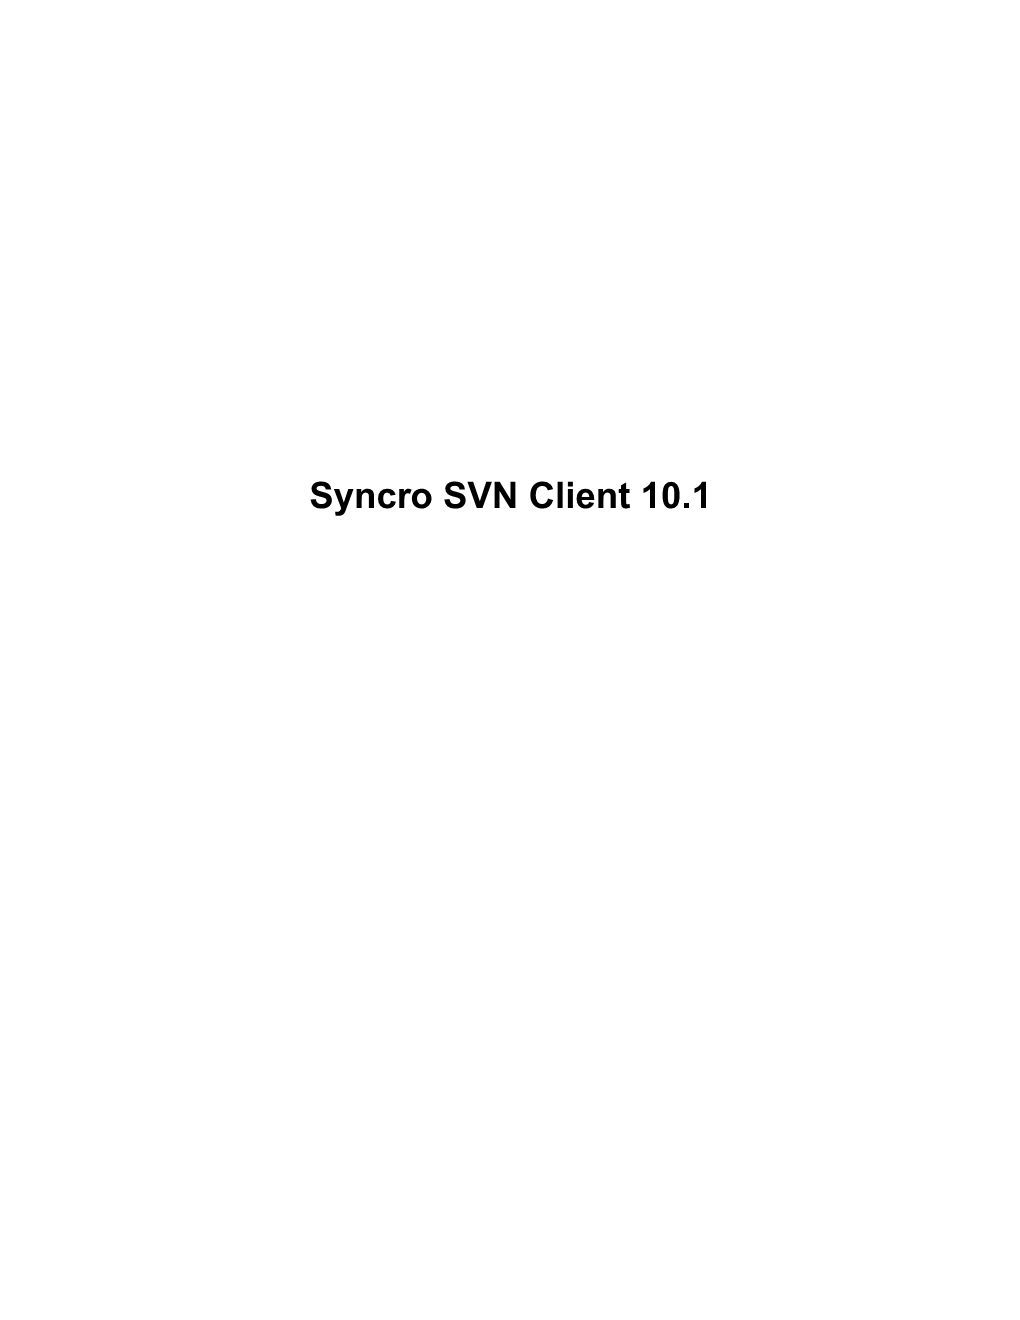 Syncro SVN Client 10.1